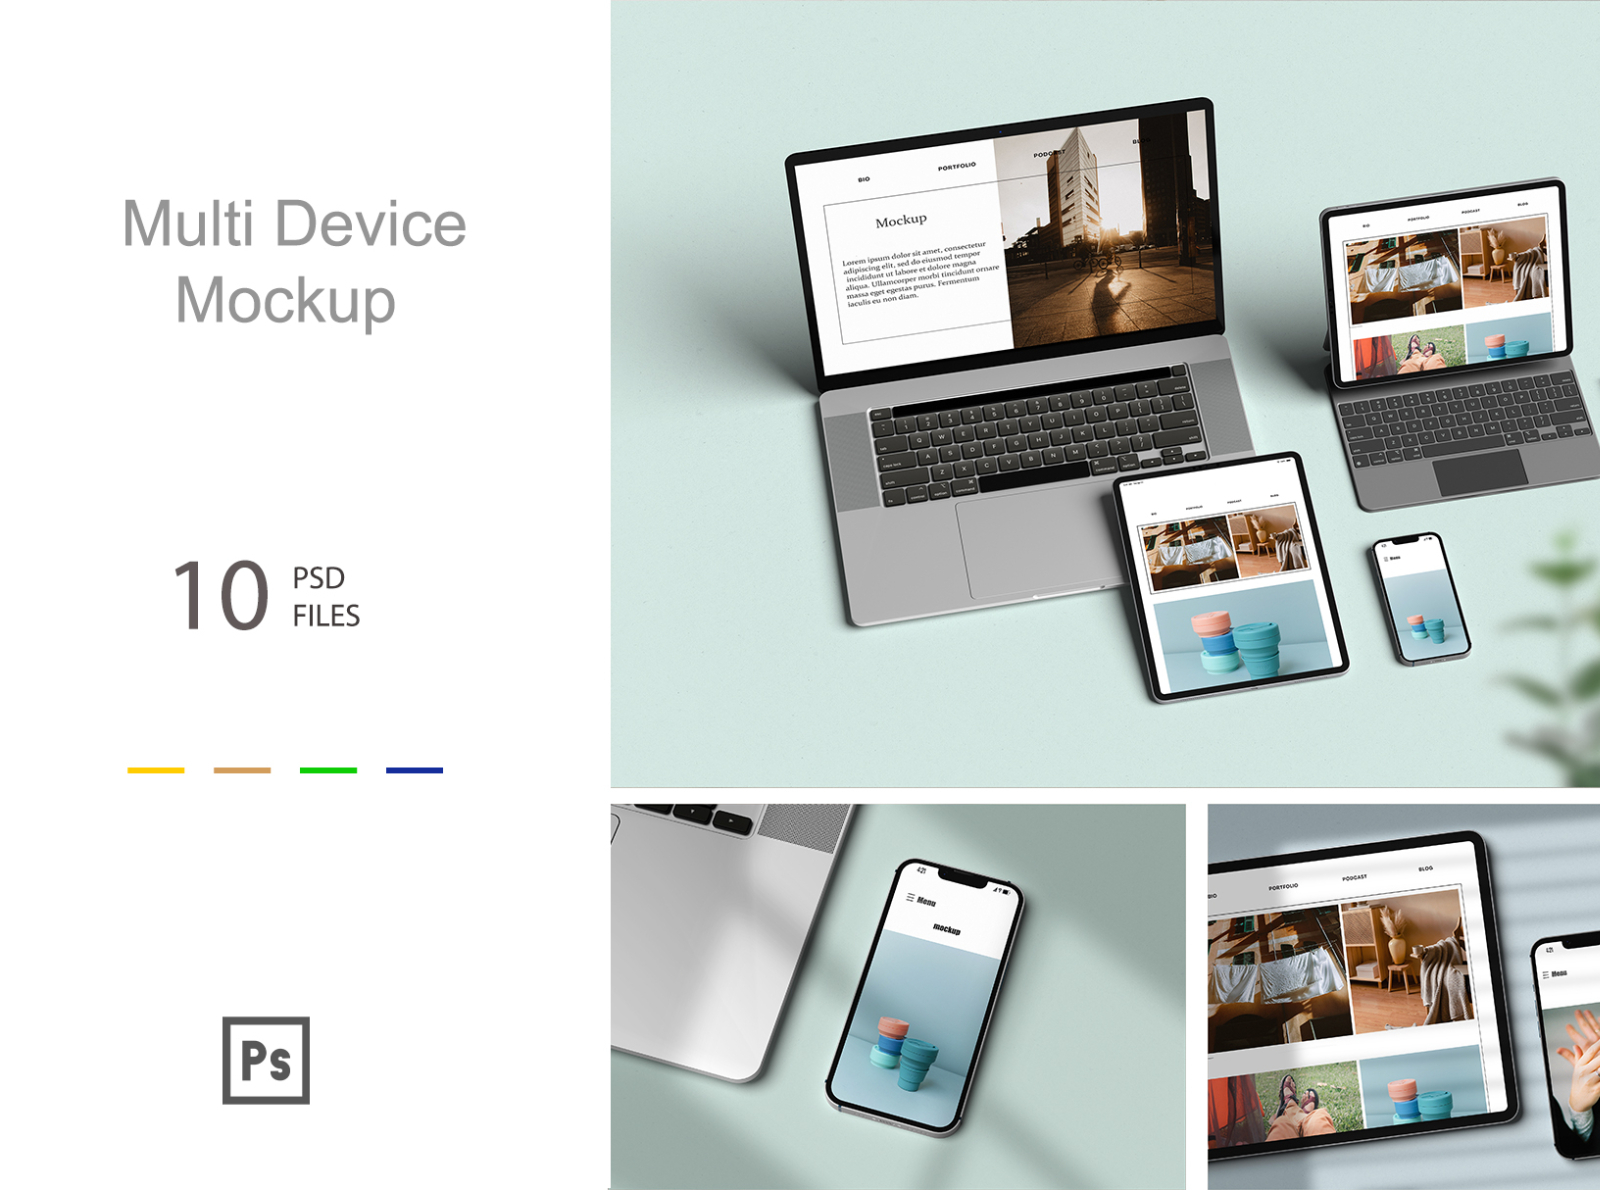 Multi Devive mockup by simpang graphic on Dribbble